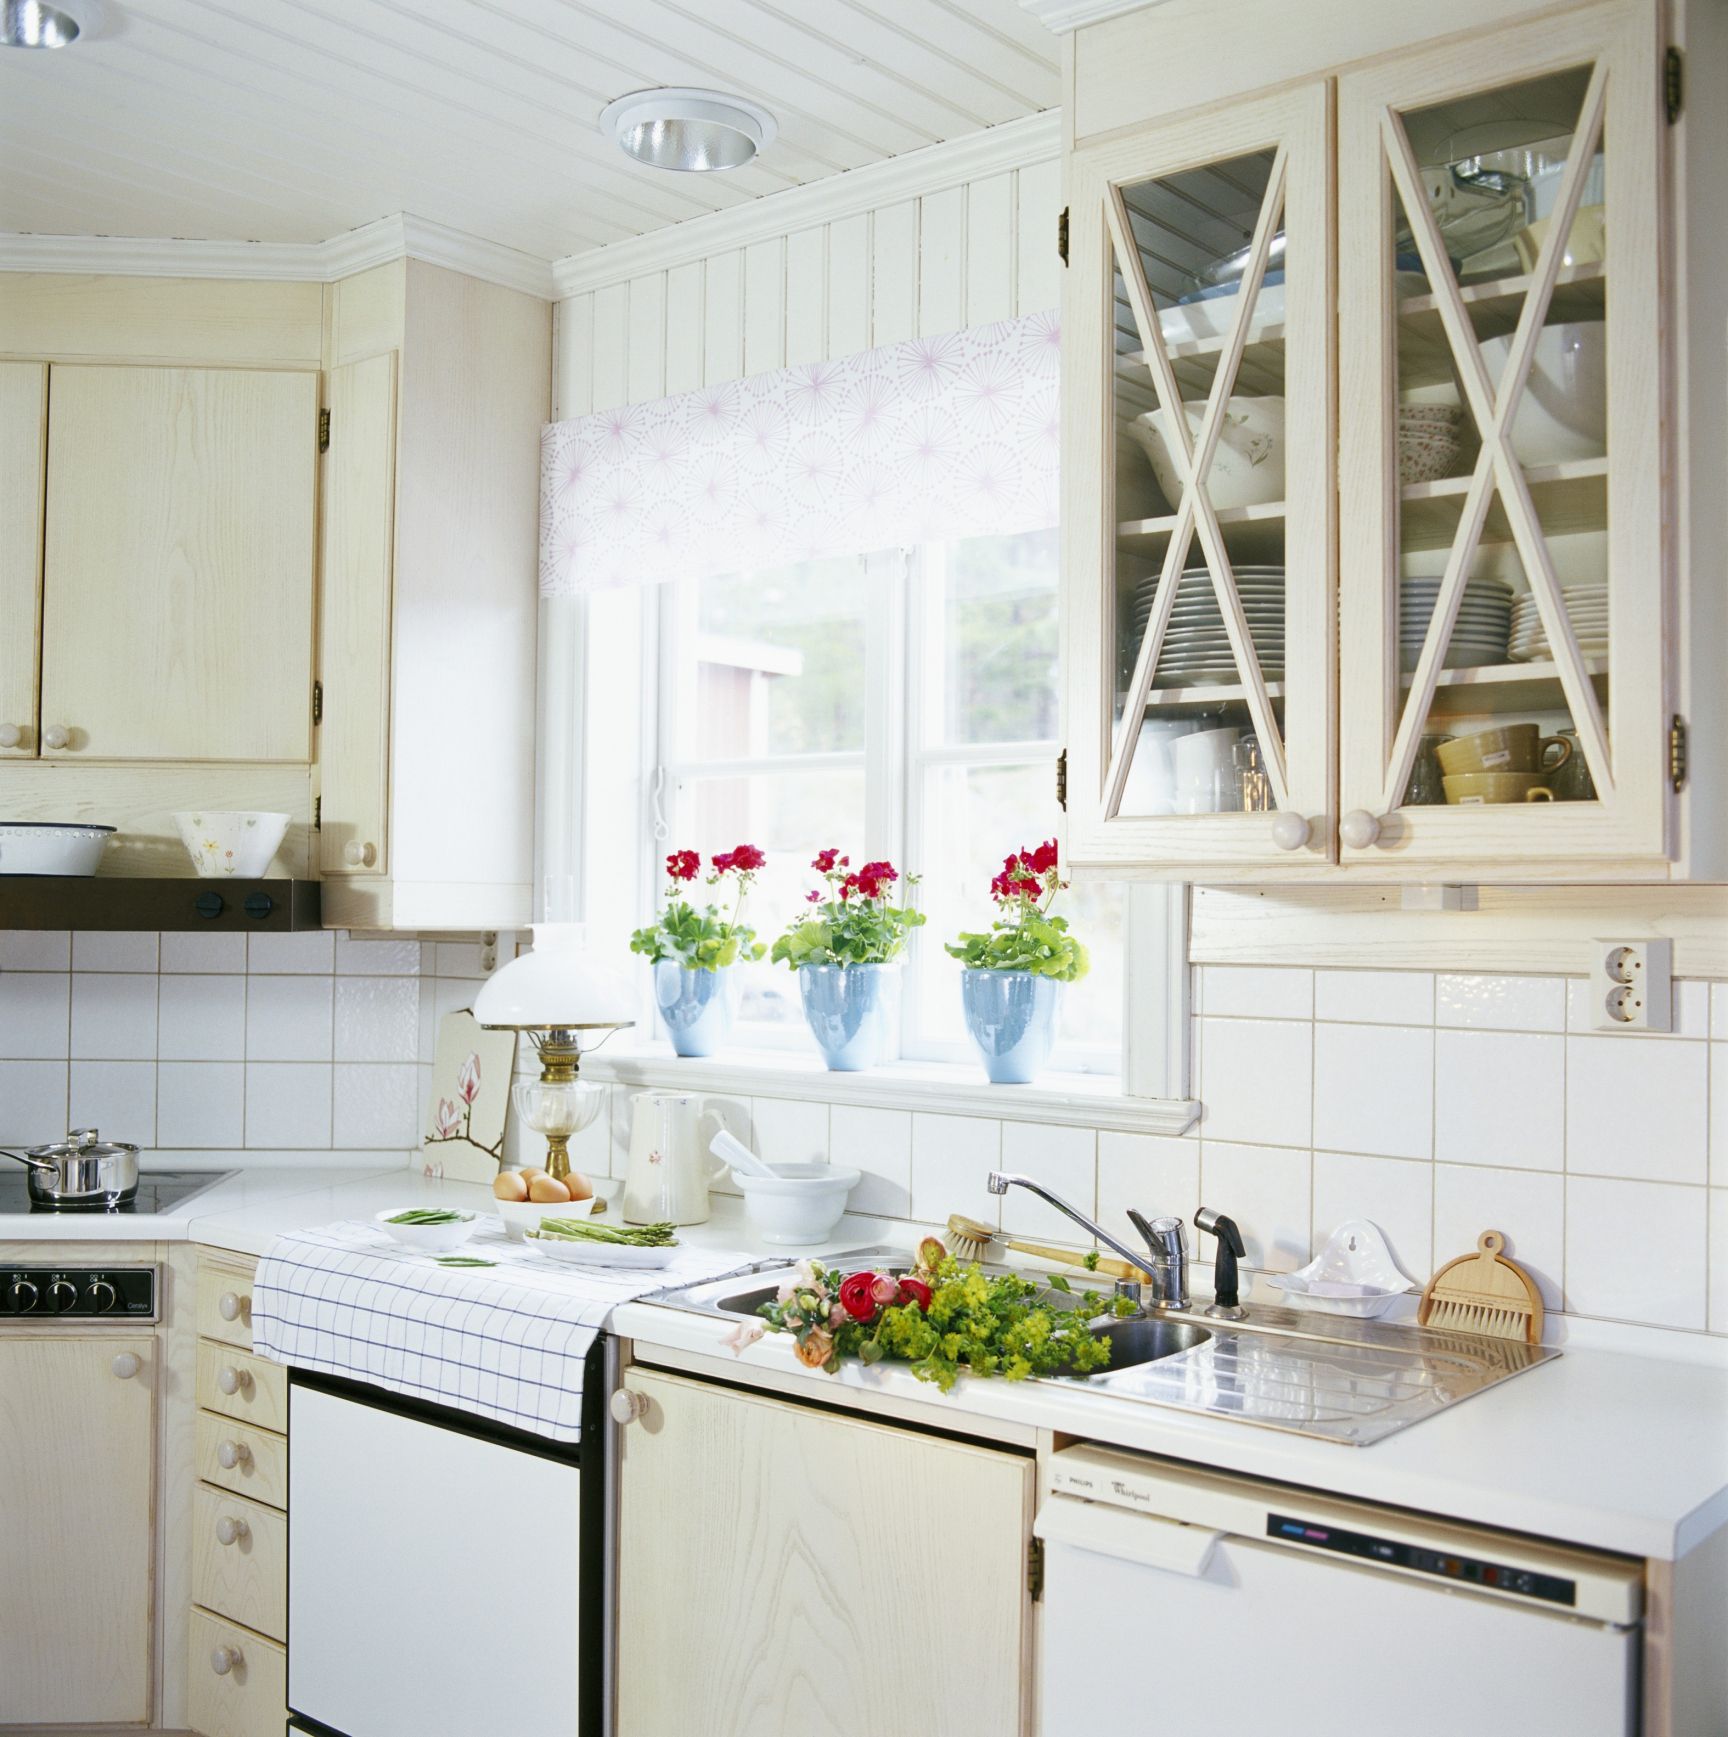 RTA Kitchen Cabinets Basics To Get You Started